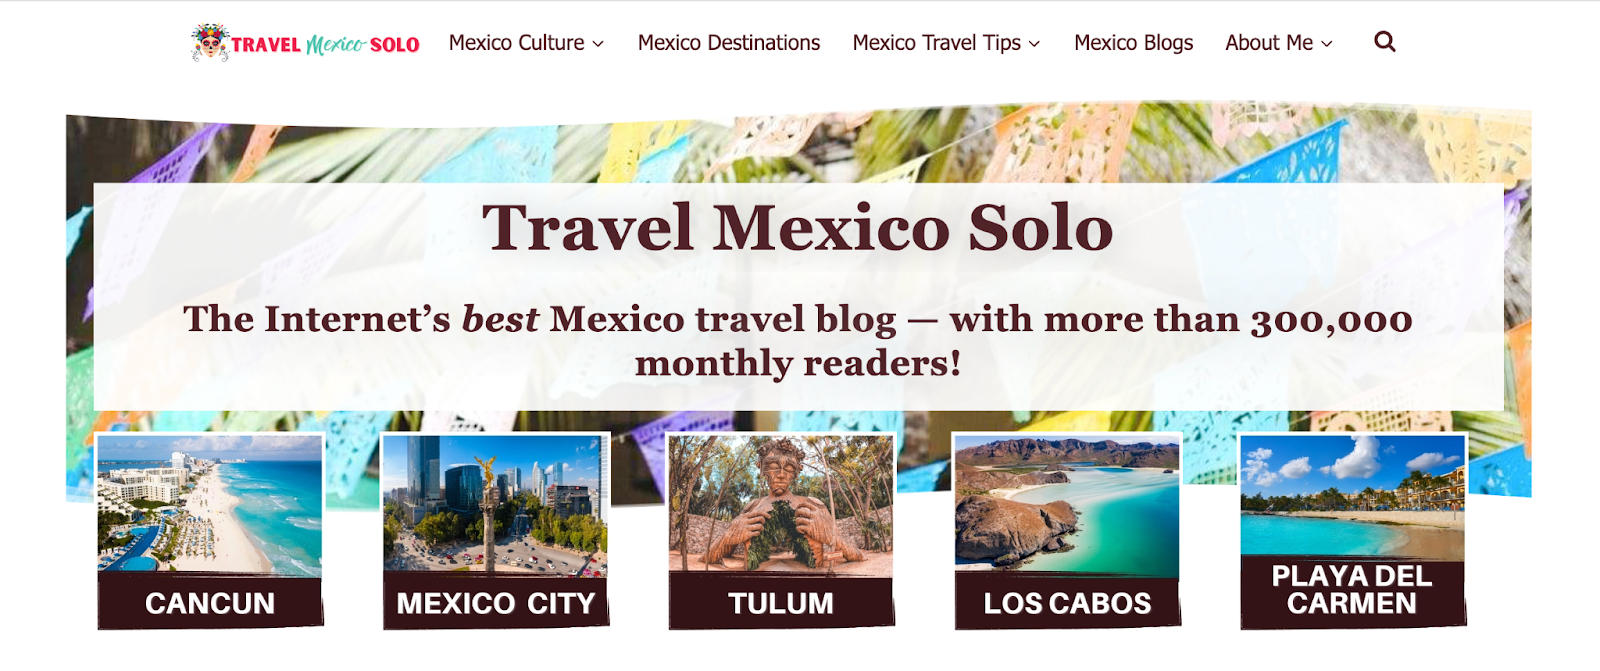 A screenshot of the Travel Mexico Solo website